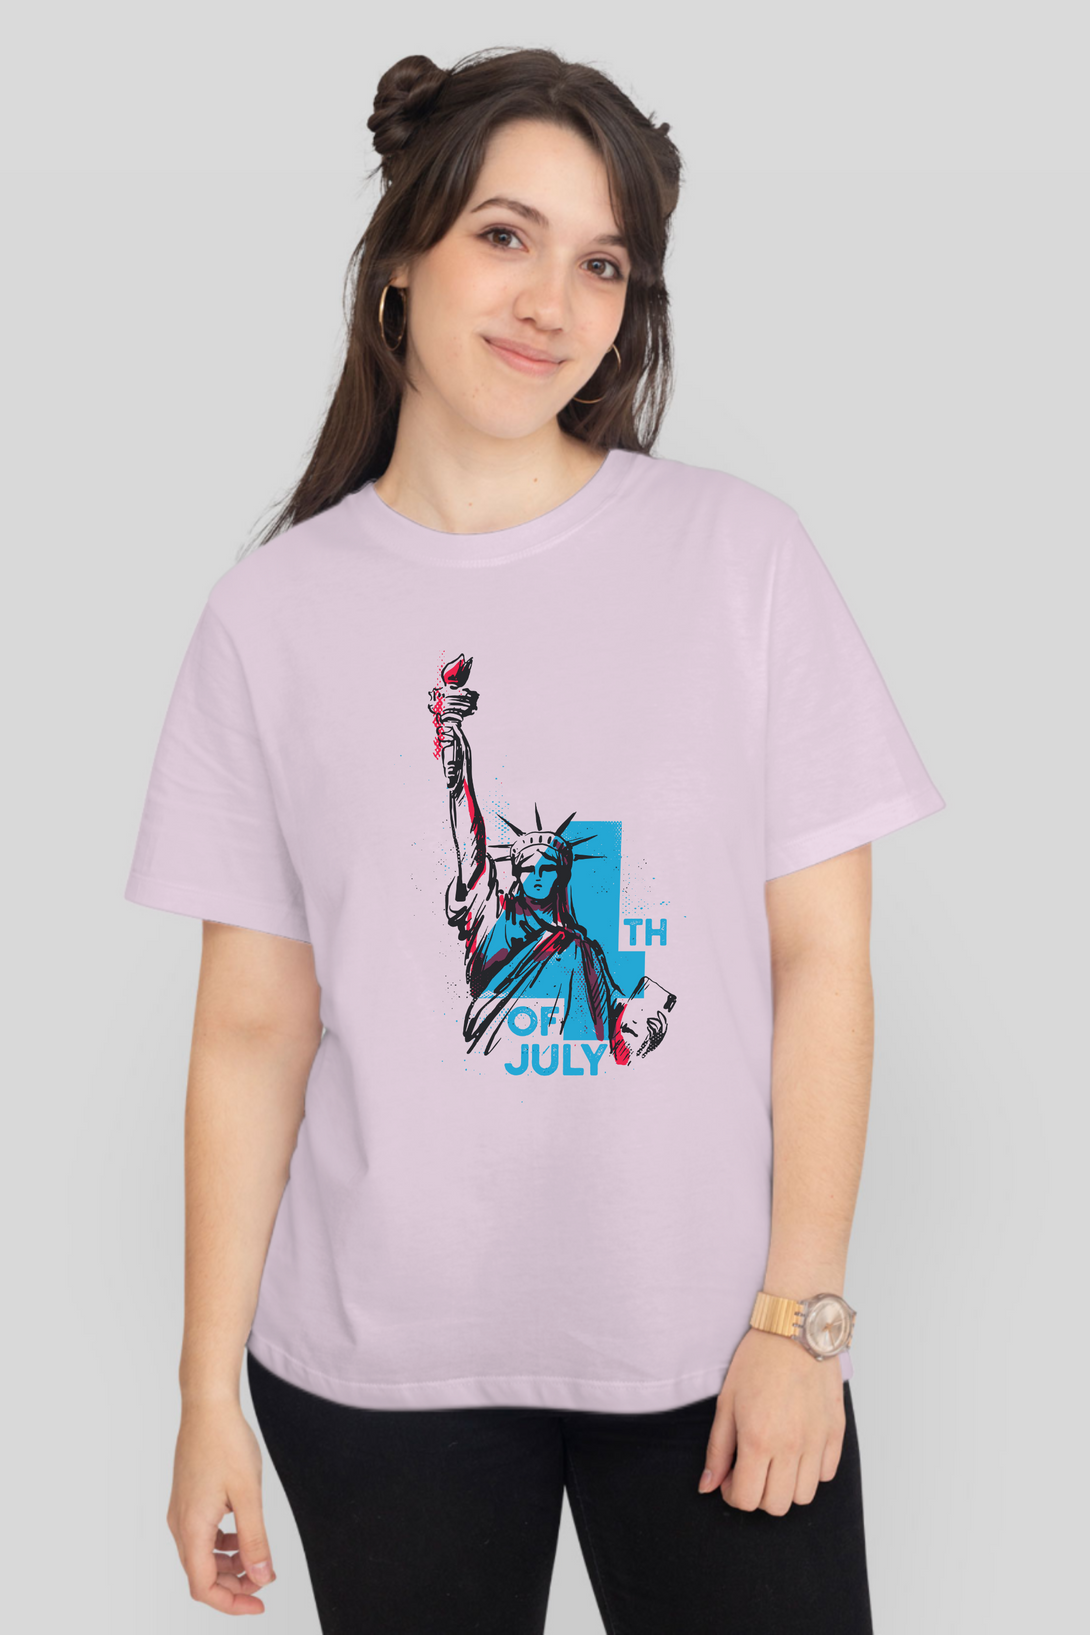 Statue Of Liberty Vintage Printed T-Shirt For Women - WowWaves - 9